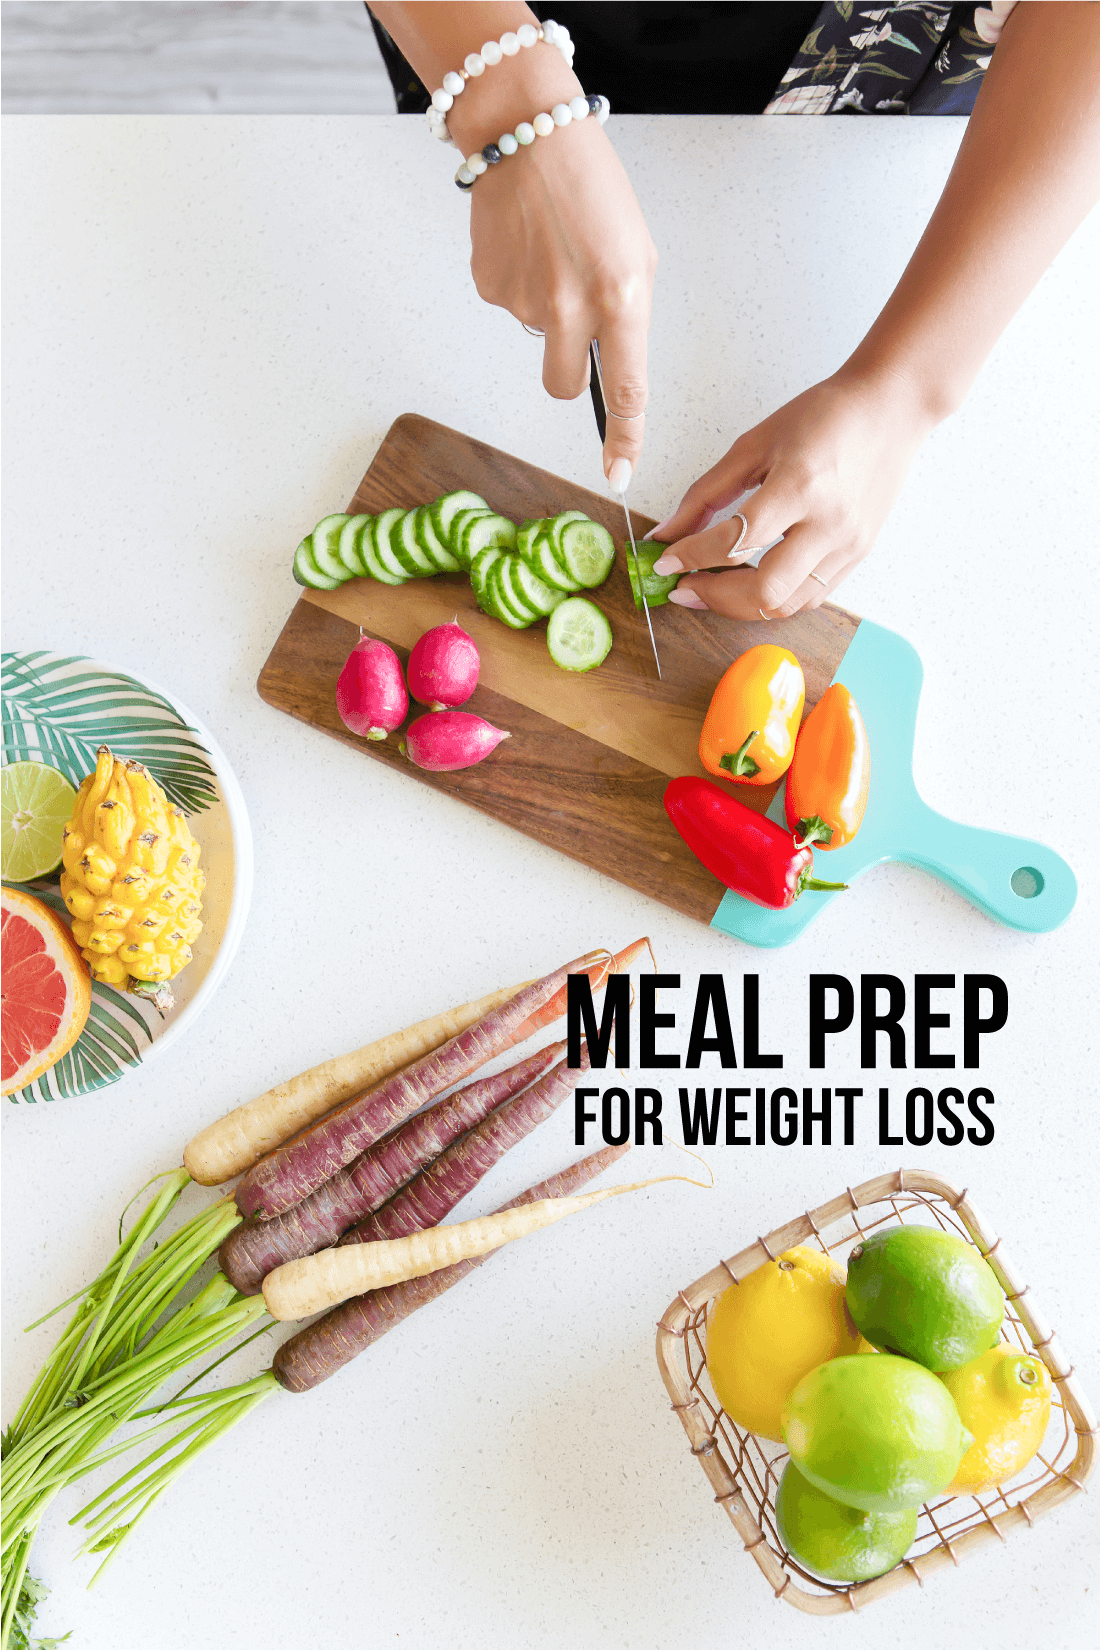 Meal Prep for Weight Loss - use these tips and recipes to lose weight.